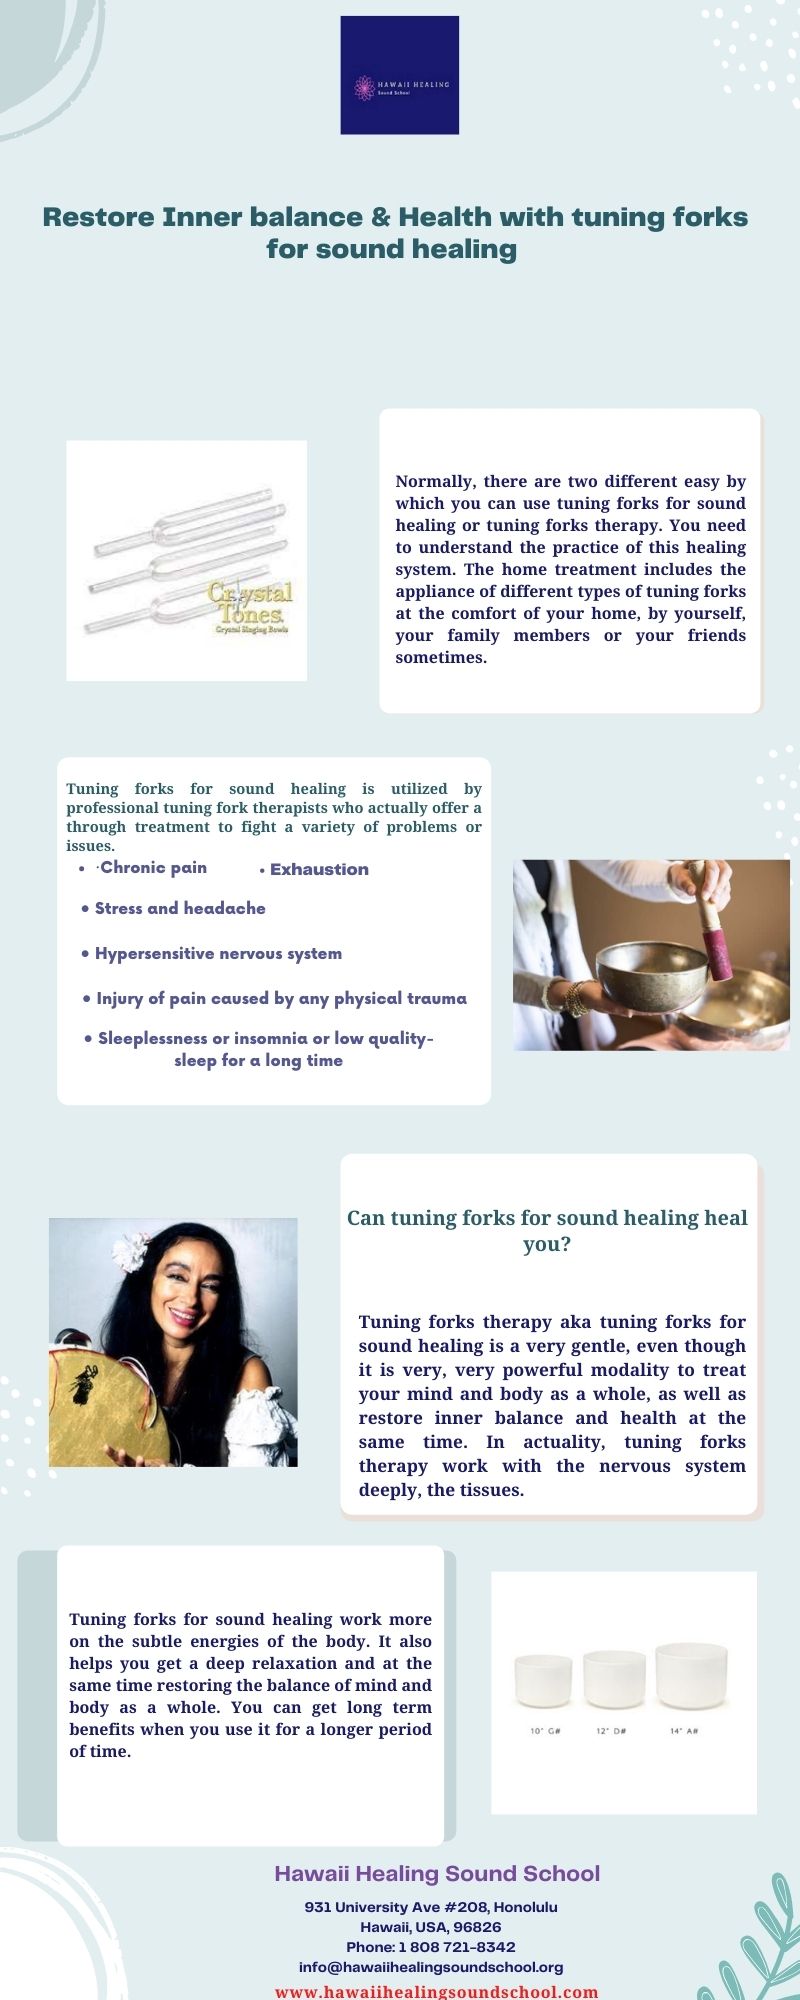 Restore Inner balance & Health with tuning forks for sound healing  Tuning forks healing therapy is very effective for restoring the inner balance and health. It also has many other benefits to stay happy and peaceful life.  For more details, visit: https://bit.ly/3rEmB8R by hawaiihealingusa